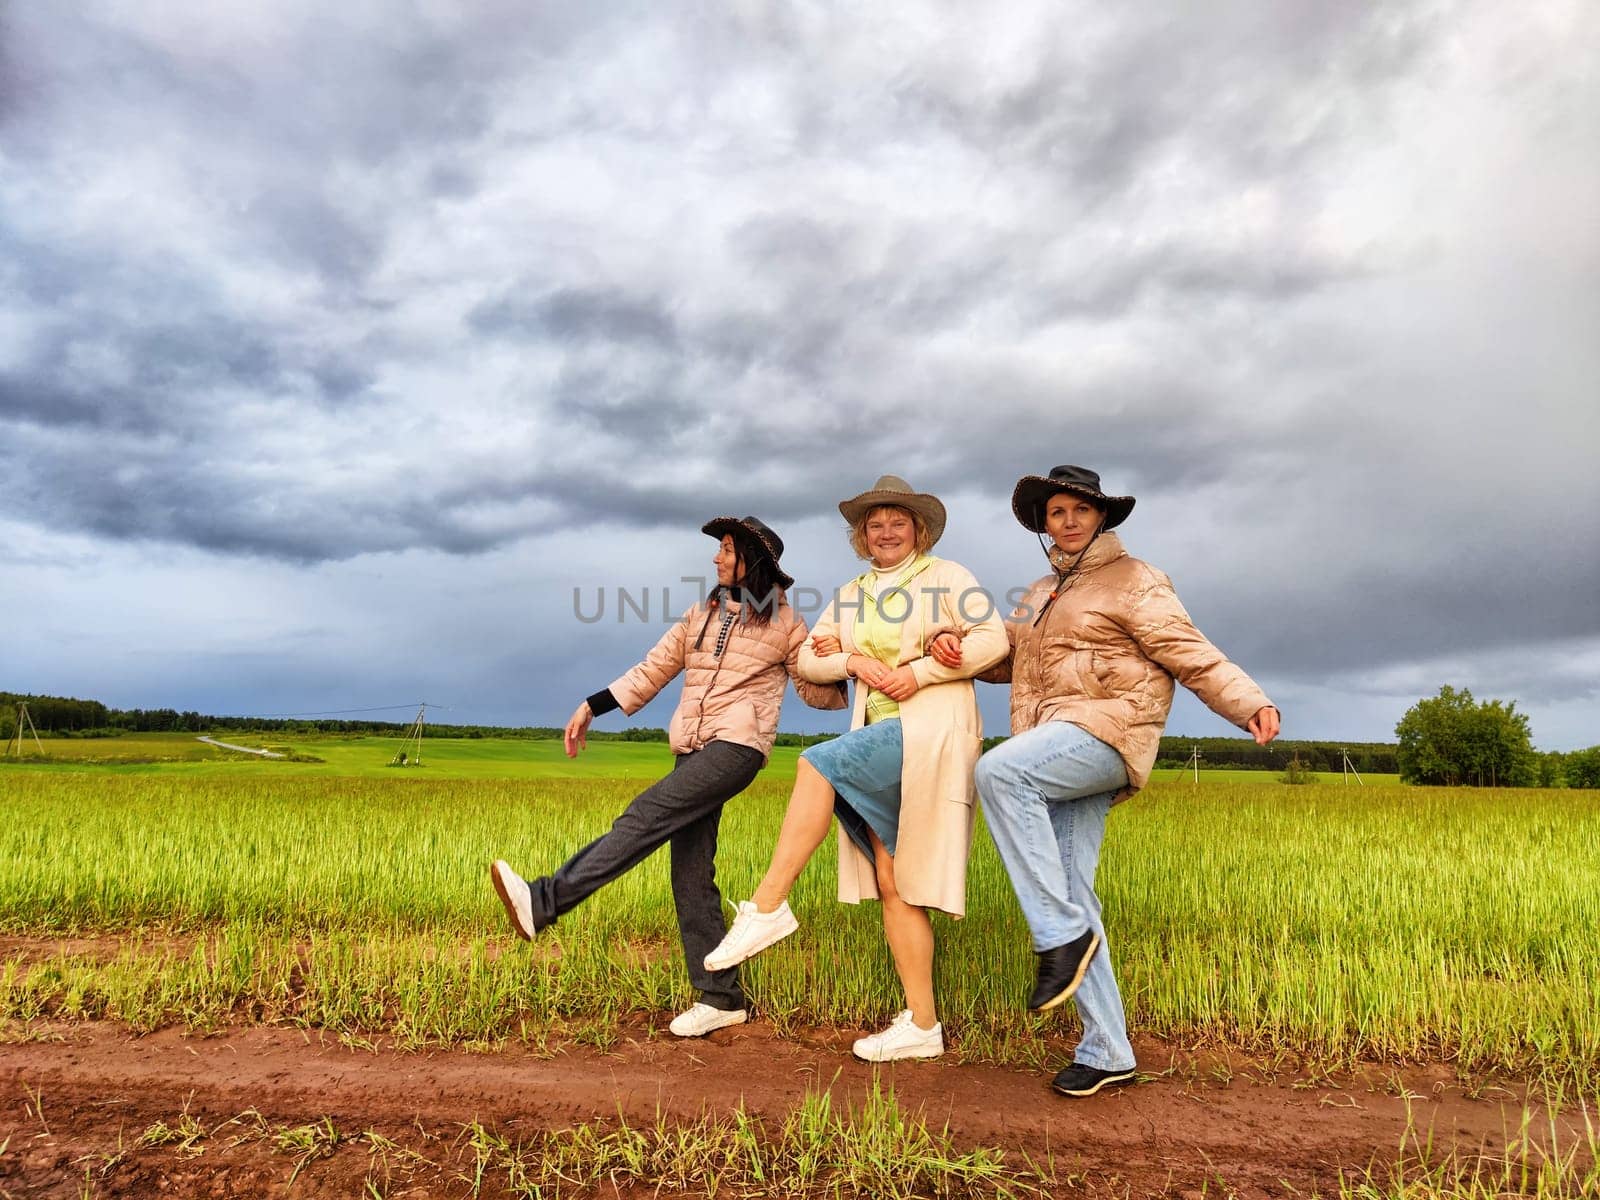 Adult girls looking like a cowboys in a hats in a field and with a stormy sky with clouds posing in the rain. Women having fun outdoors on rural and rustic nature by keleny